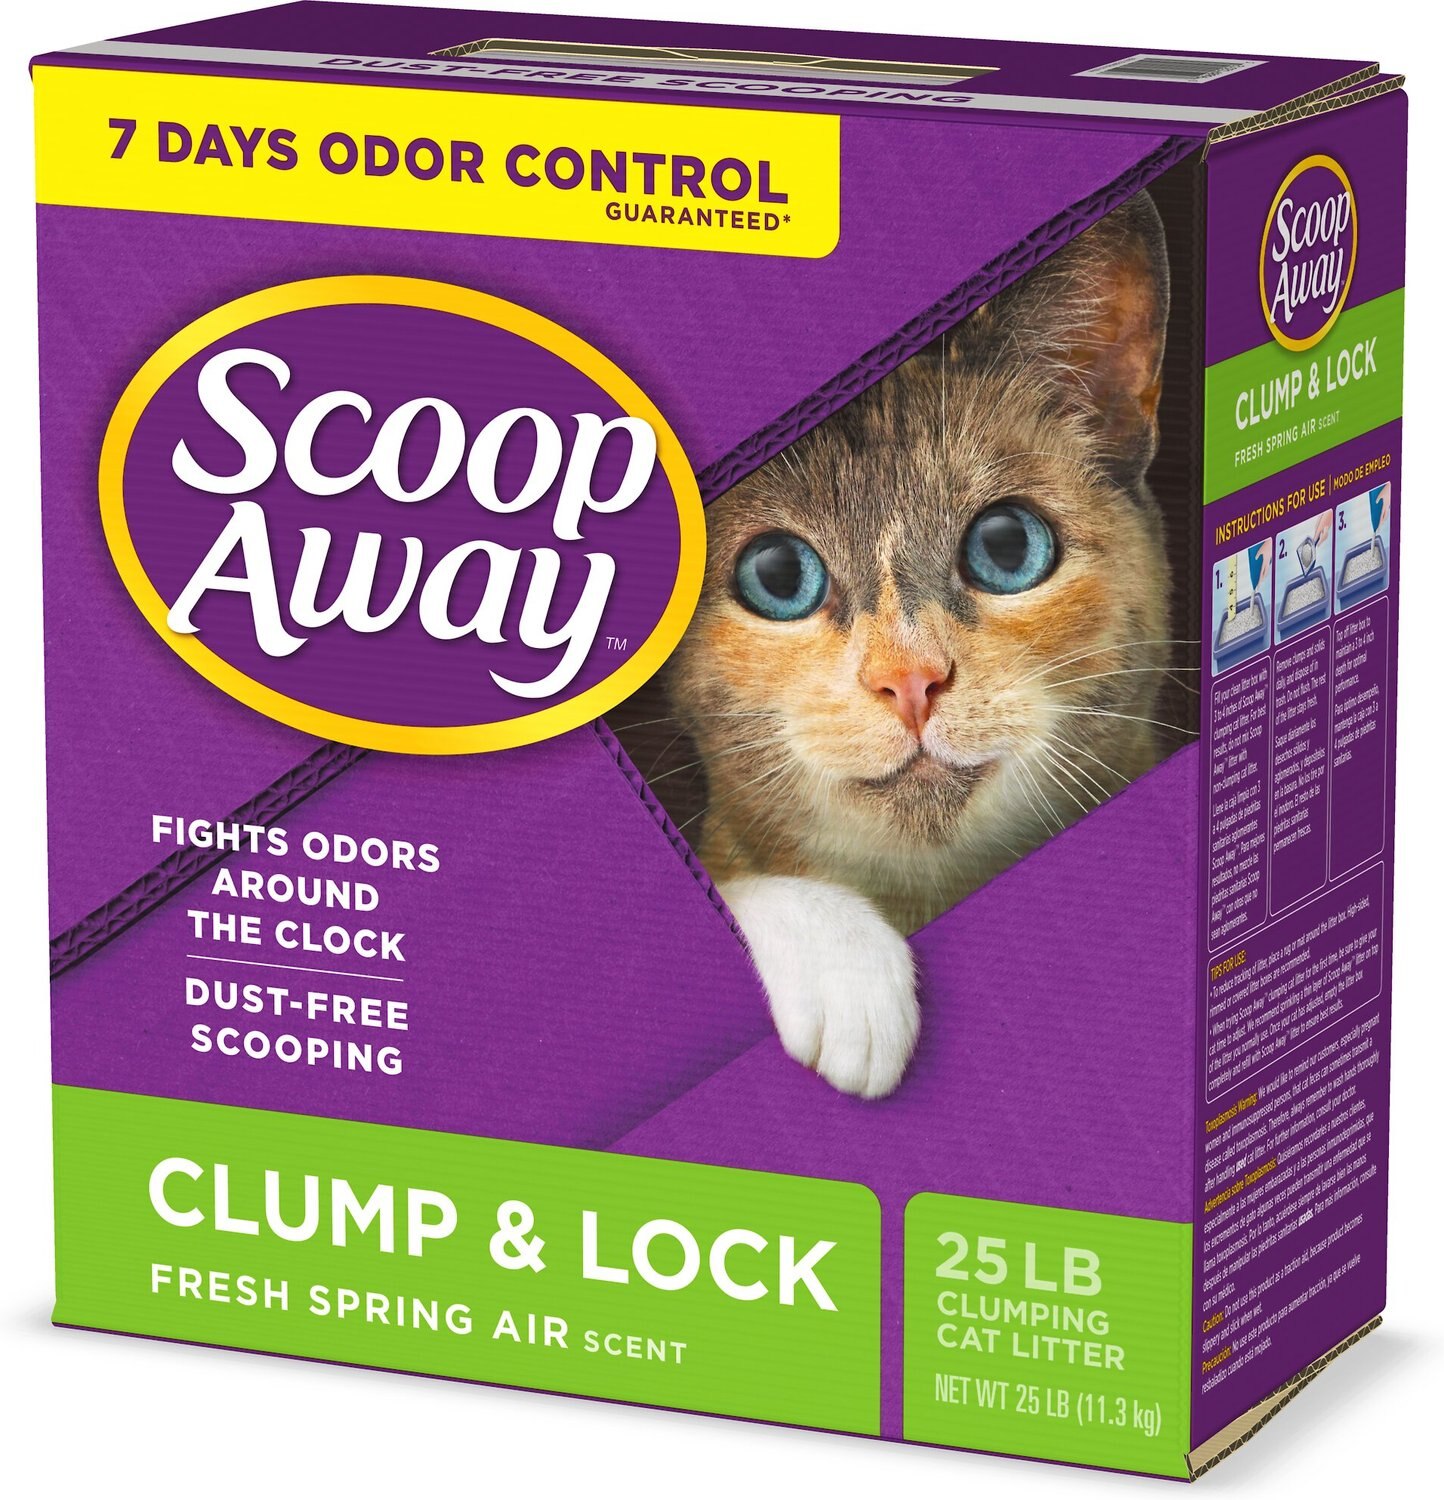 Scoop Away Clump & Lock Scented Clumping Clay Cat Litter, 25lb box